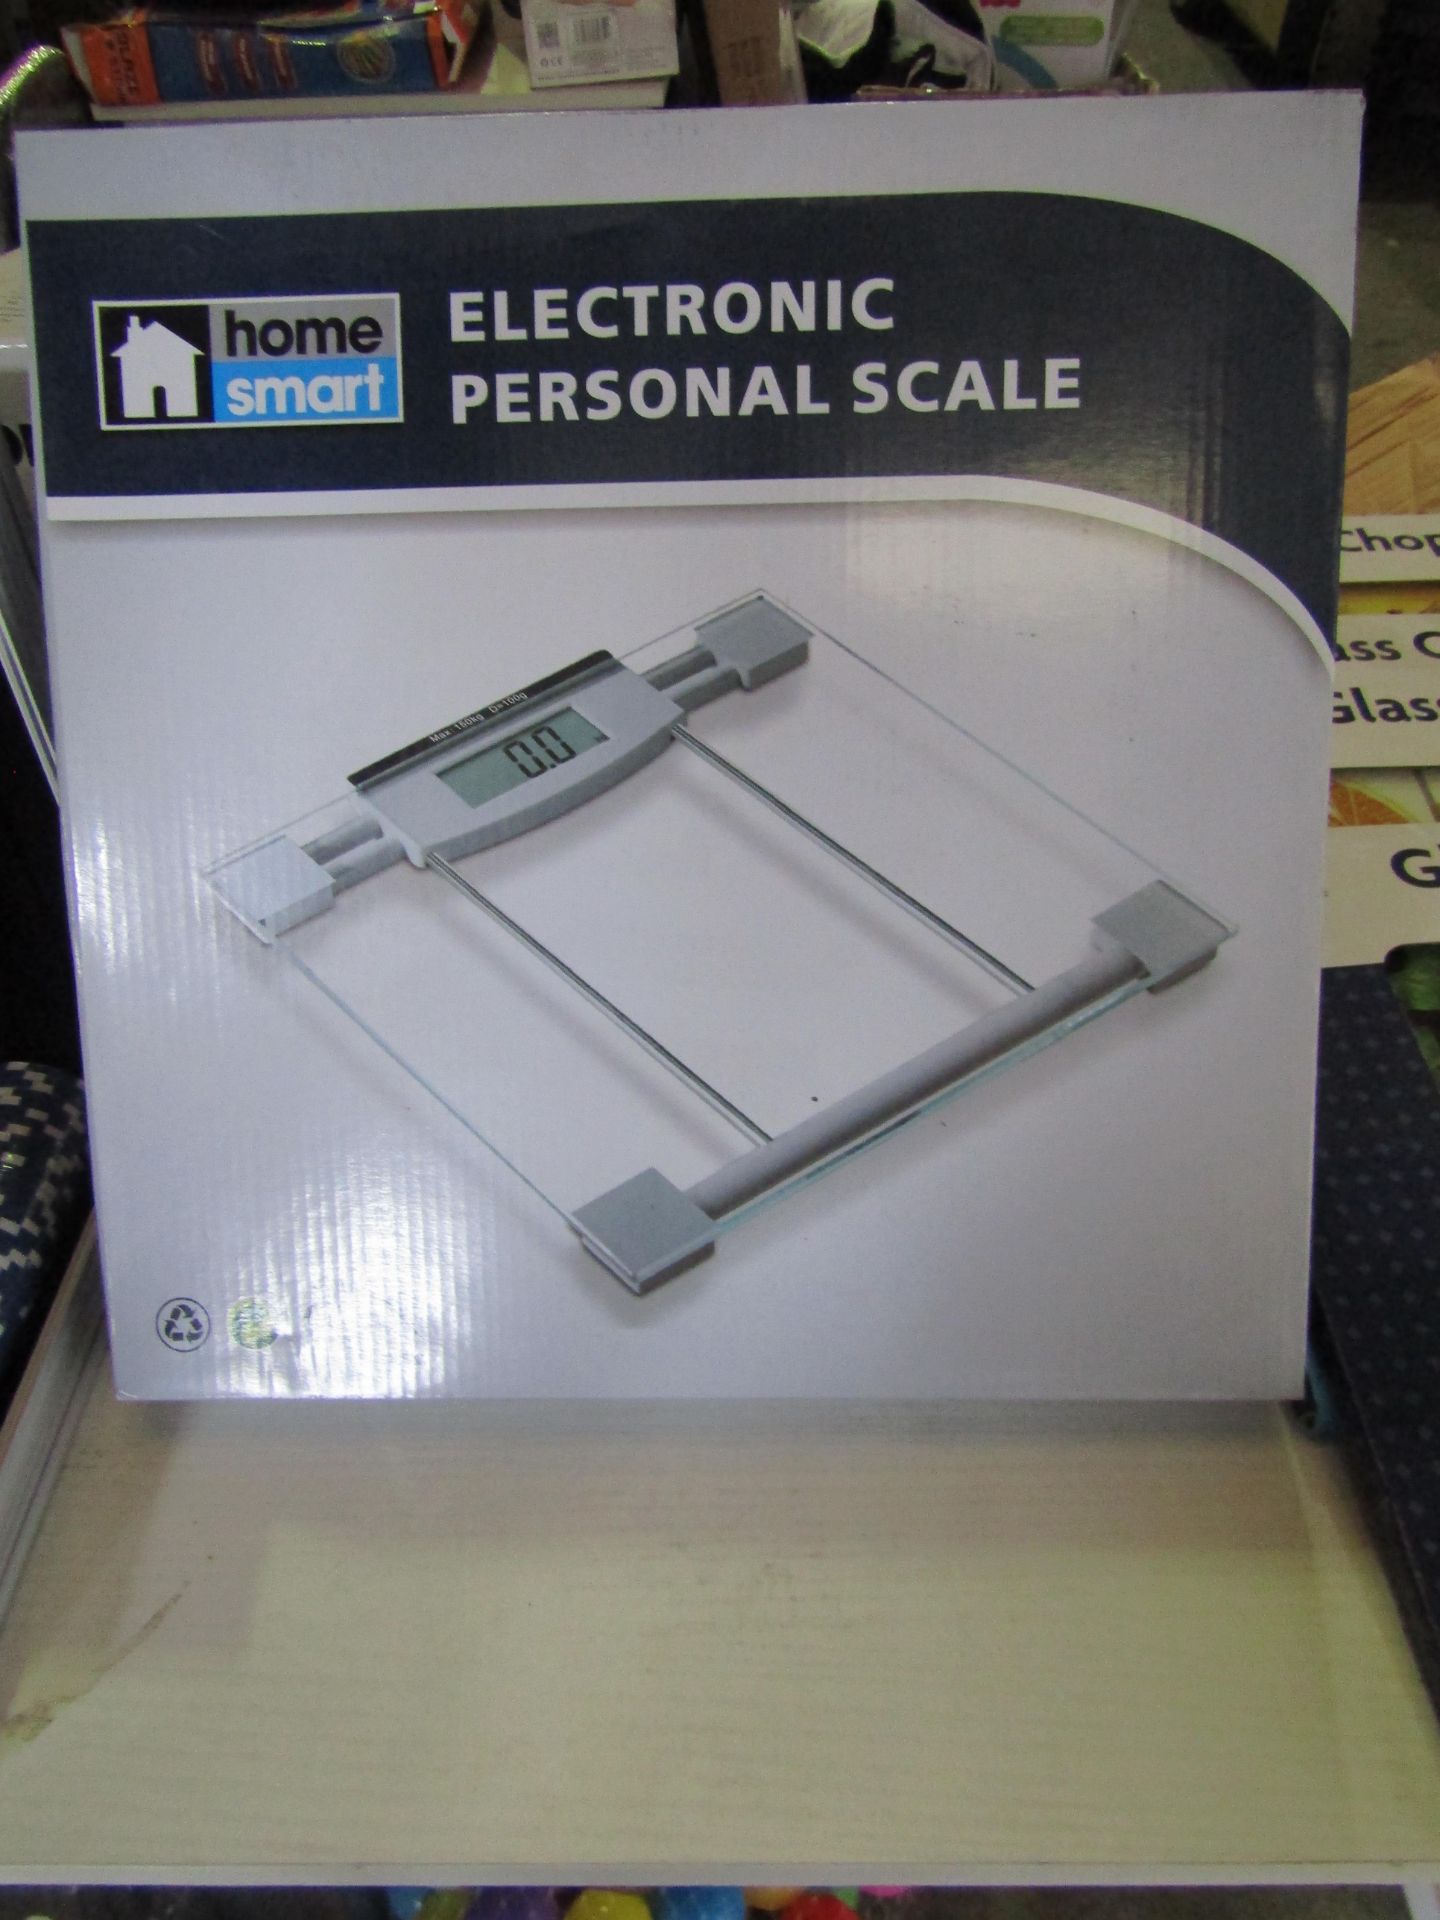 Home Smart Electronic Personal Scale Unchecked & Boxed (See Image)